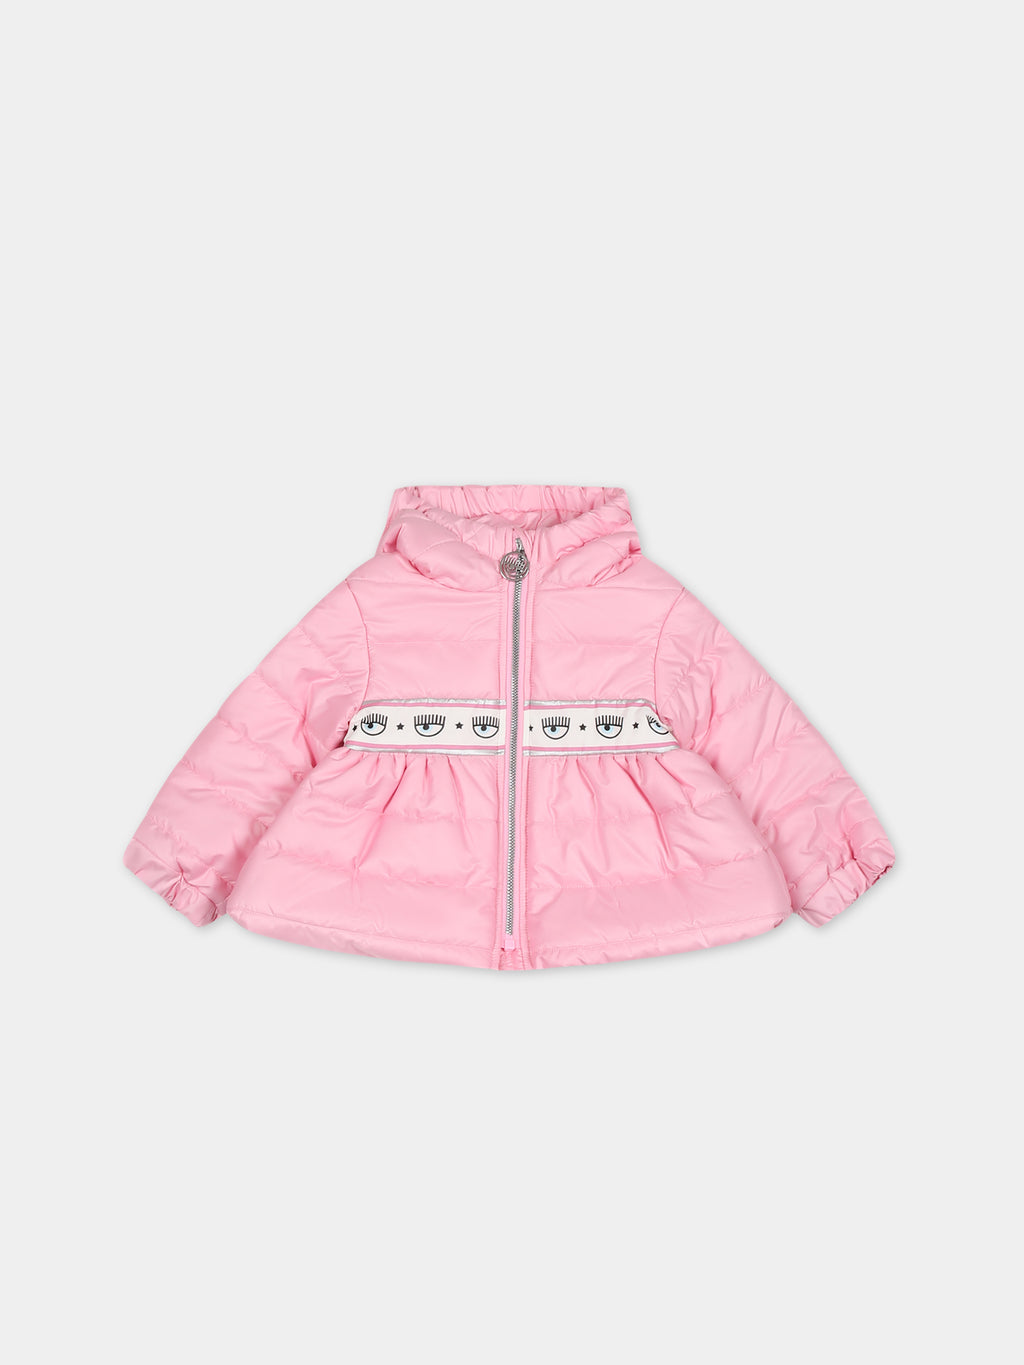 Pink down jacket for baby girl with eyestar